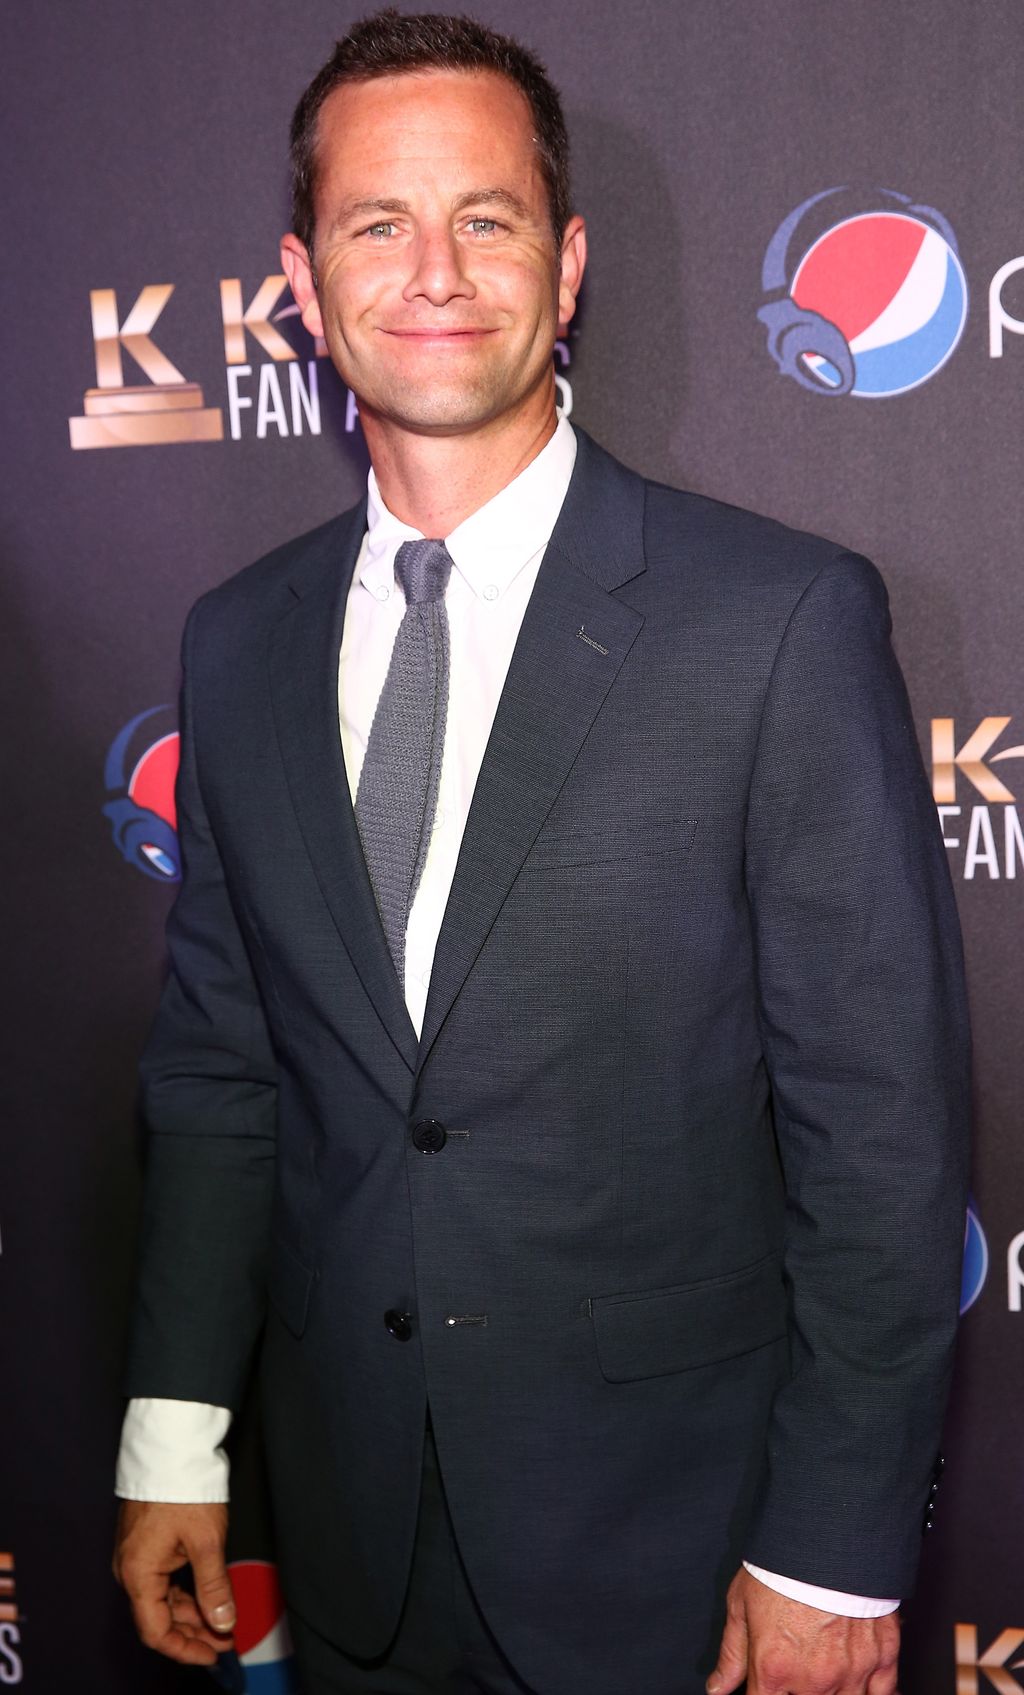 3rd Annual KLOVE Fan Awards At The Grand Ole Opry House - Arrivals GettyImageRank1 VERTICAL USA Tennessee Nashville ACTOR Fan - Enthusiast Award Arts Culture and Entertainment Attending Grand Ole Opry House Kirk Cameron Annual Event 2015 KLOVE Topix Besto